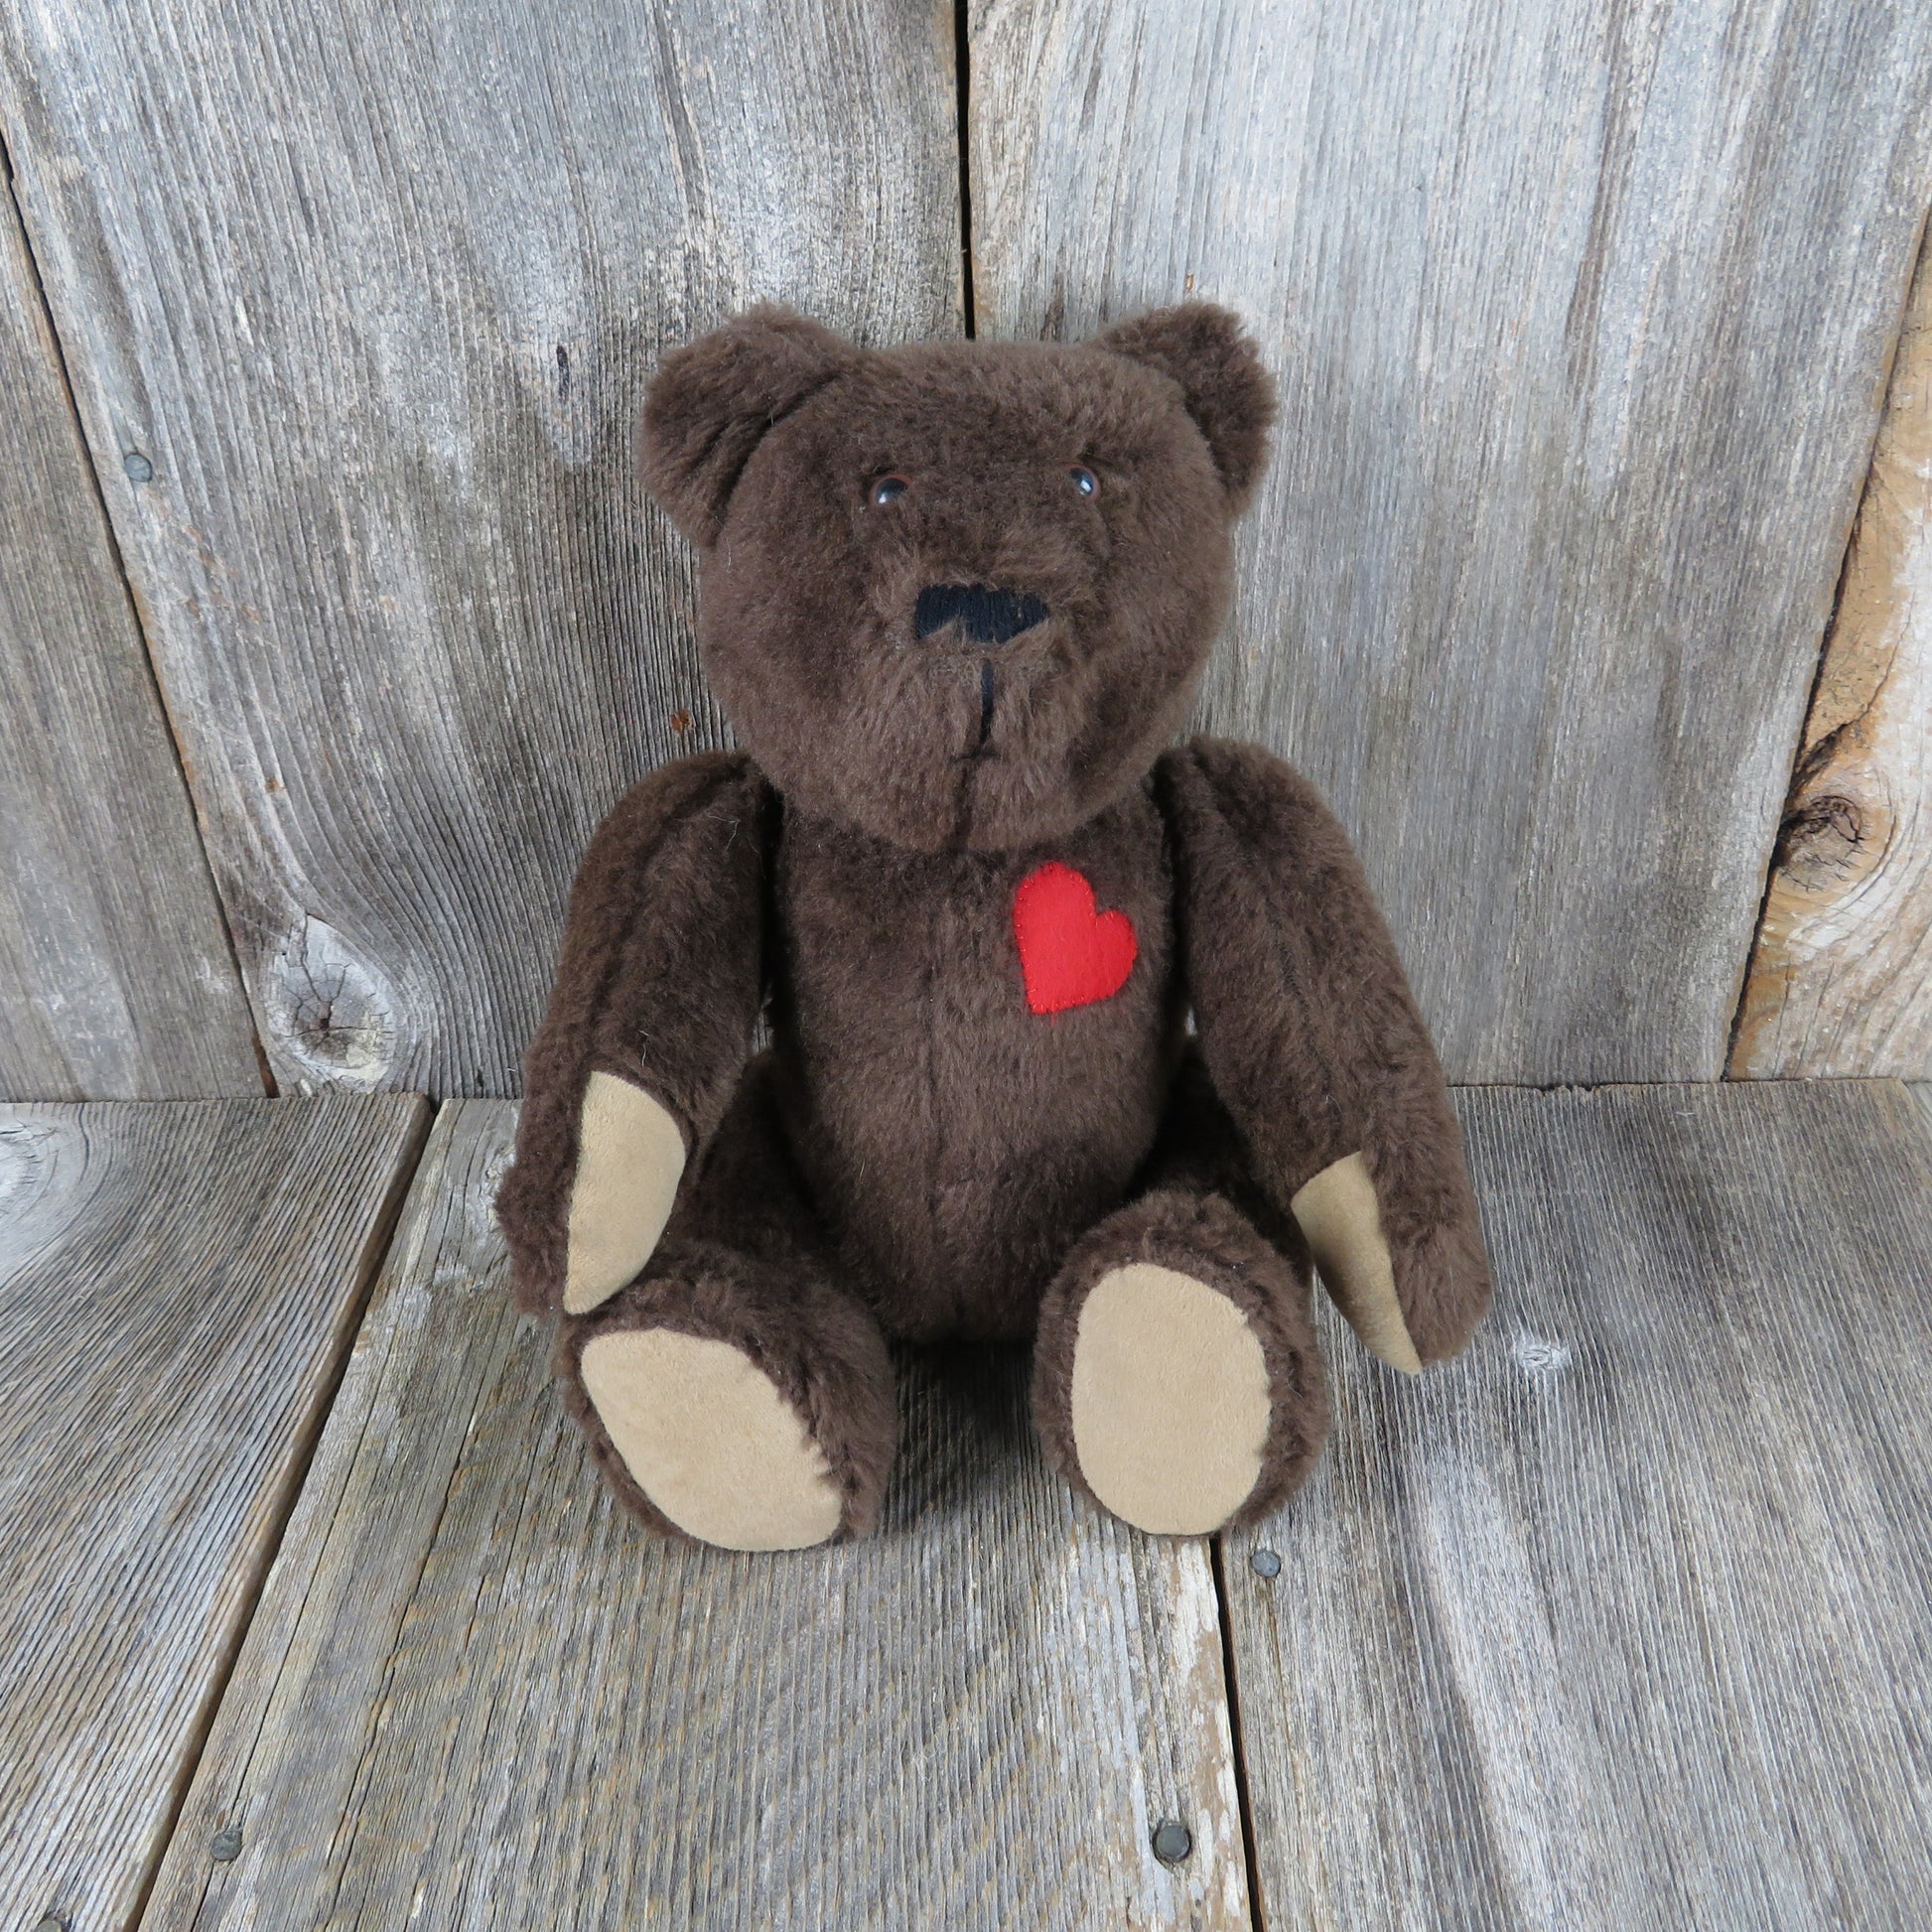 Vintage Handmade Teddy Bear Plush Red Heart Dark Brown Jointed Glass Eyes Stitched Nose Stuffed Animal - At Grandma's Table